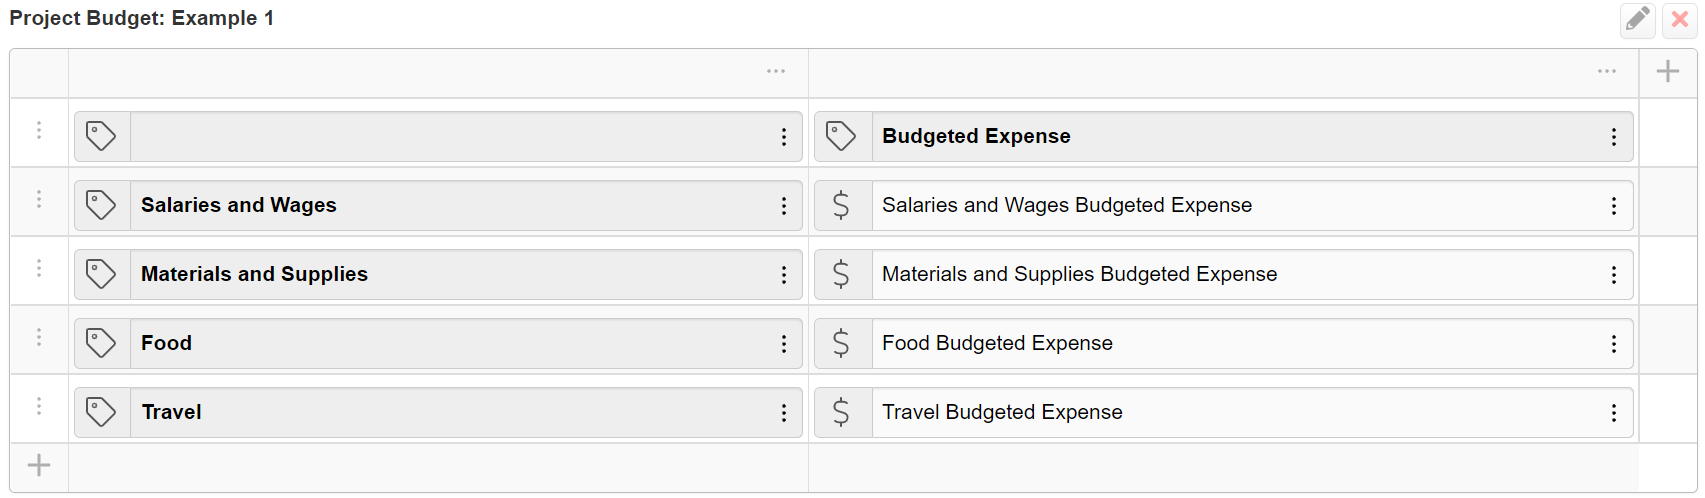 Image of a project budget table with defined columns and rows